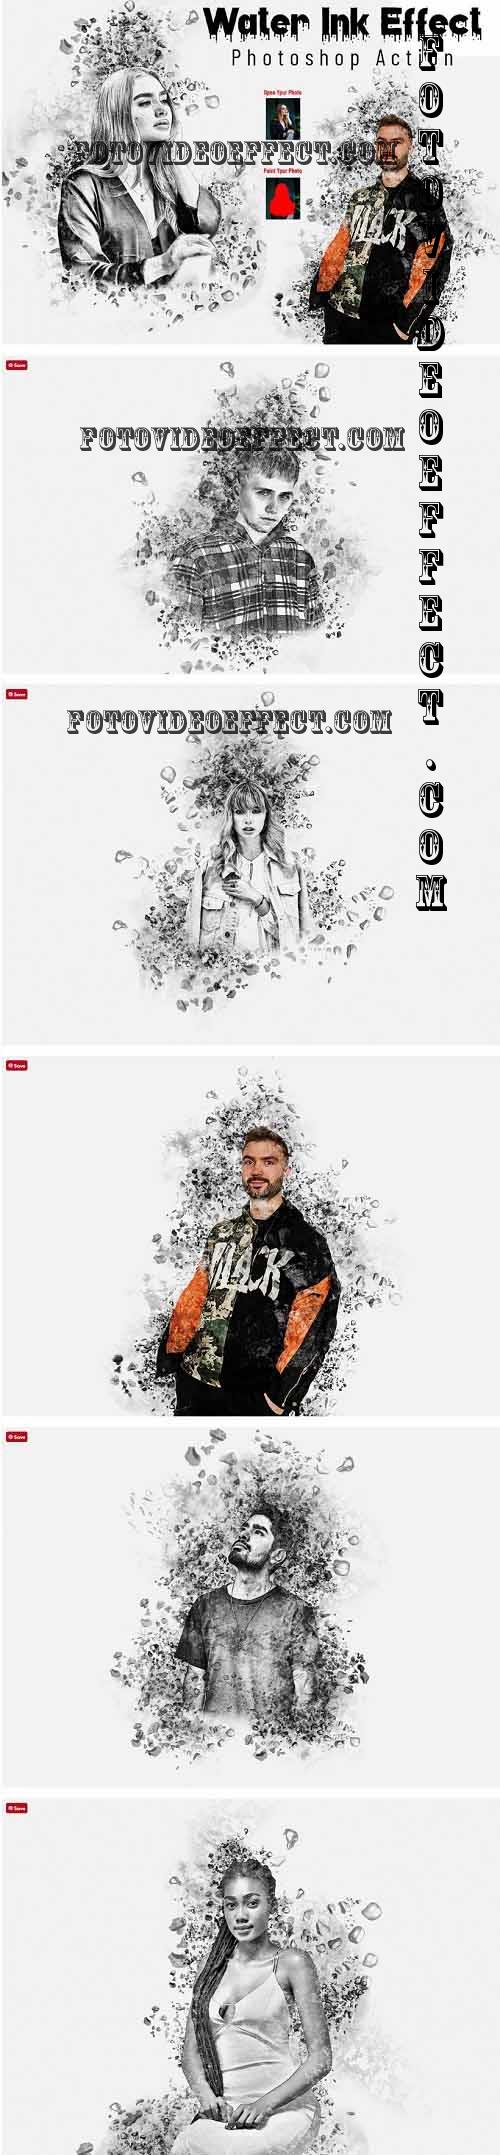 Water Ink Effect Photoshop Action - 7128635